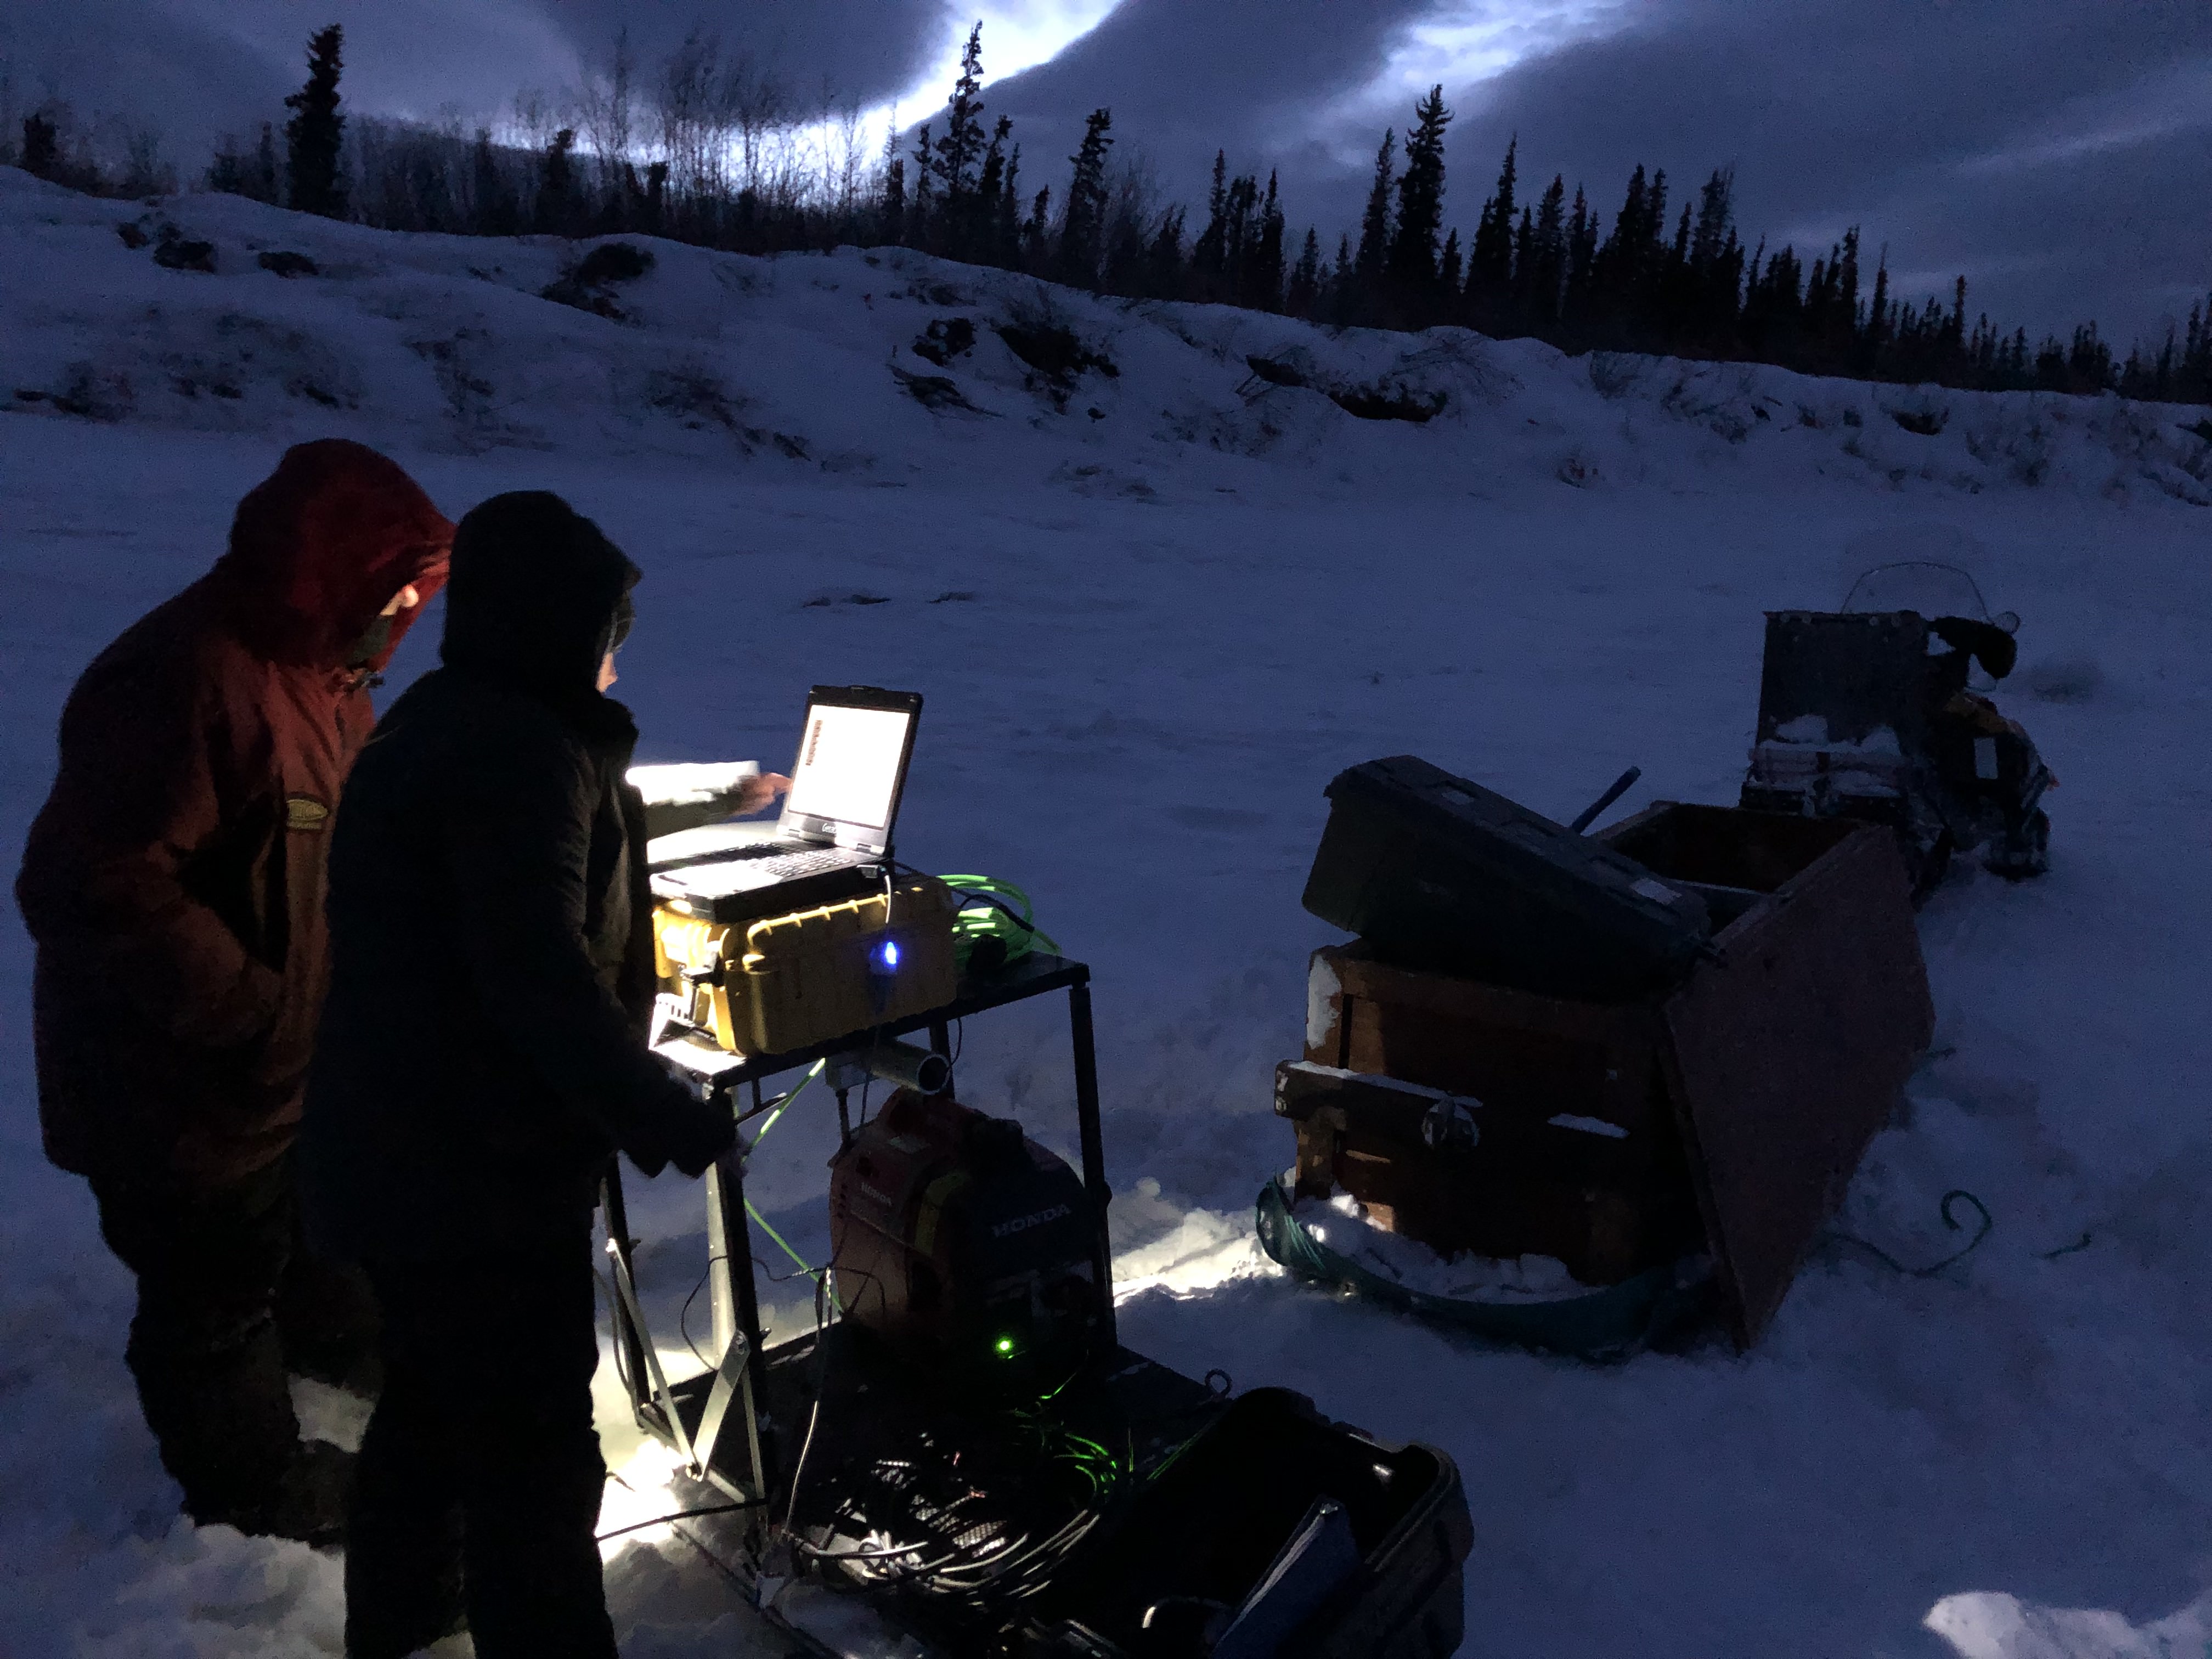 Two researchers stand in front of equipment in a dark winter scene illuminated by headlamps